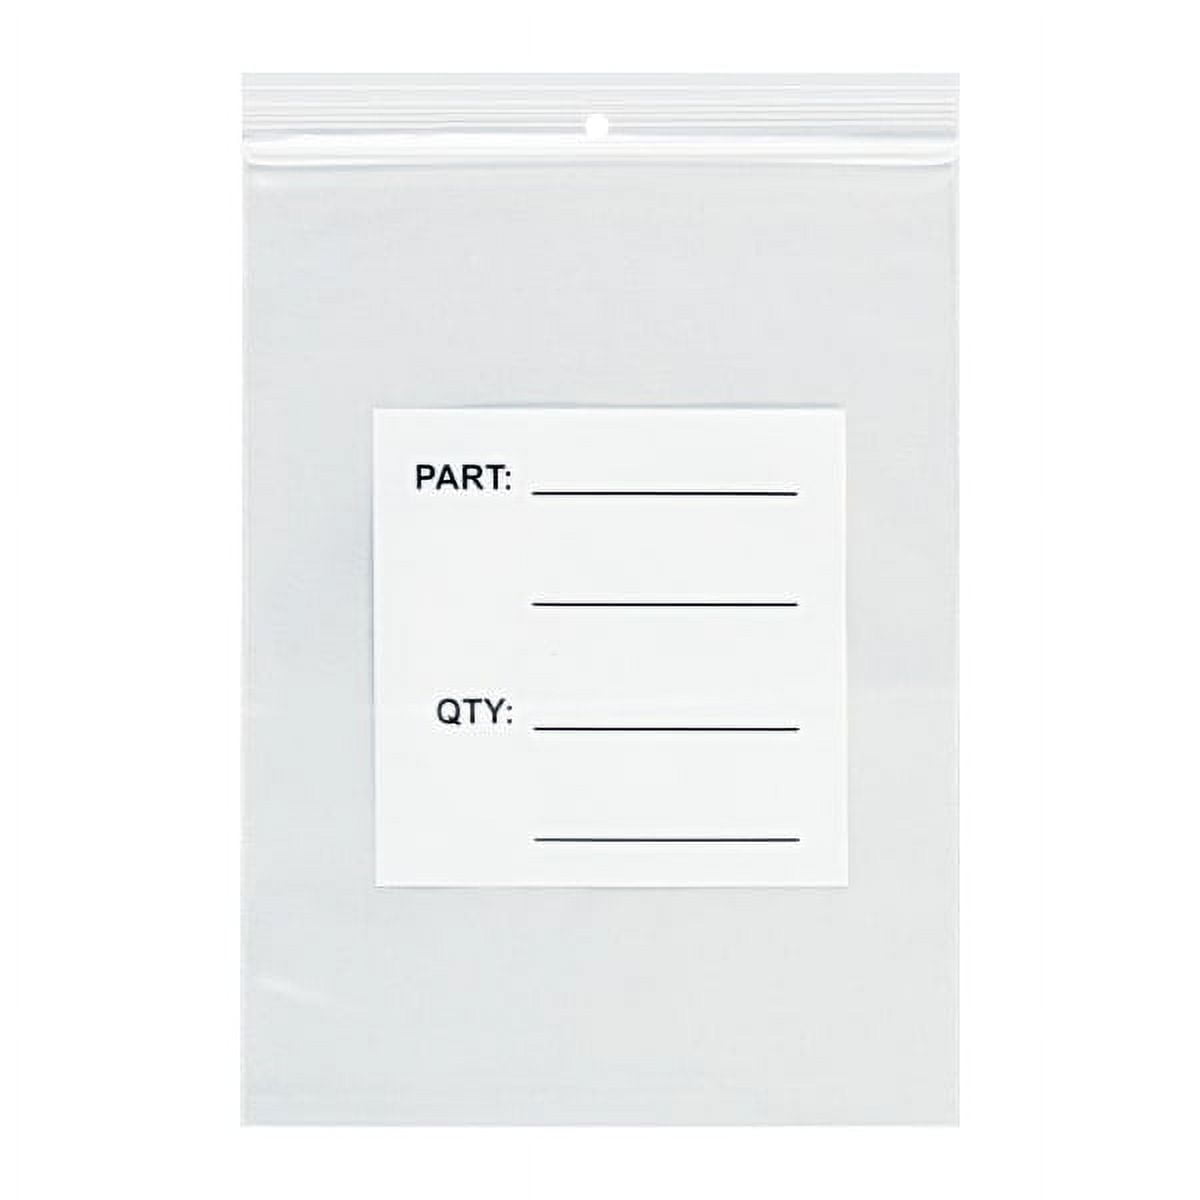 Picture of Box Partners PB12009 9 x 12 in. 4 Mil Parts Bags with Hang Holes - Pack of 1000